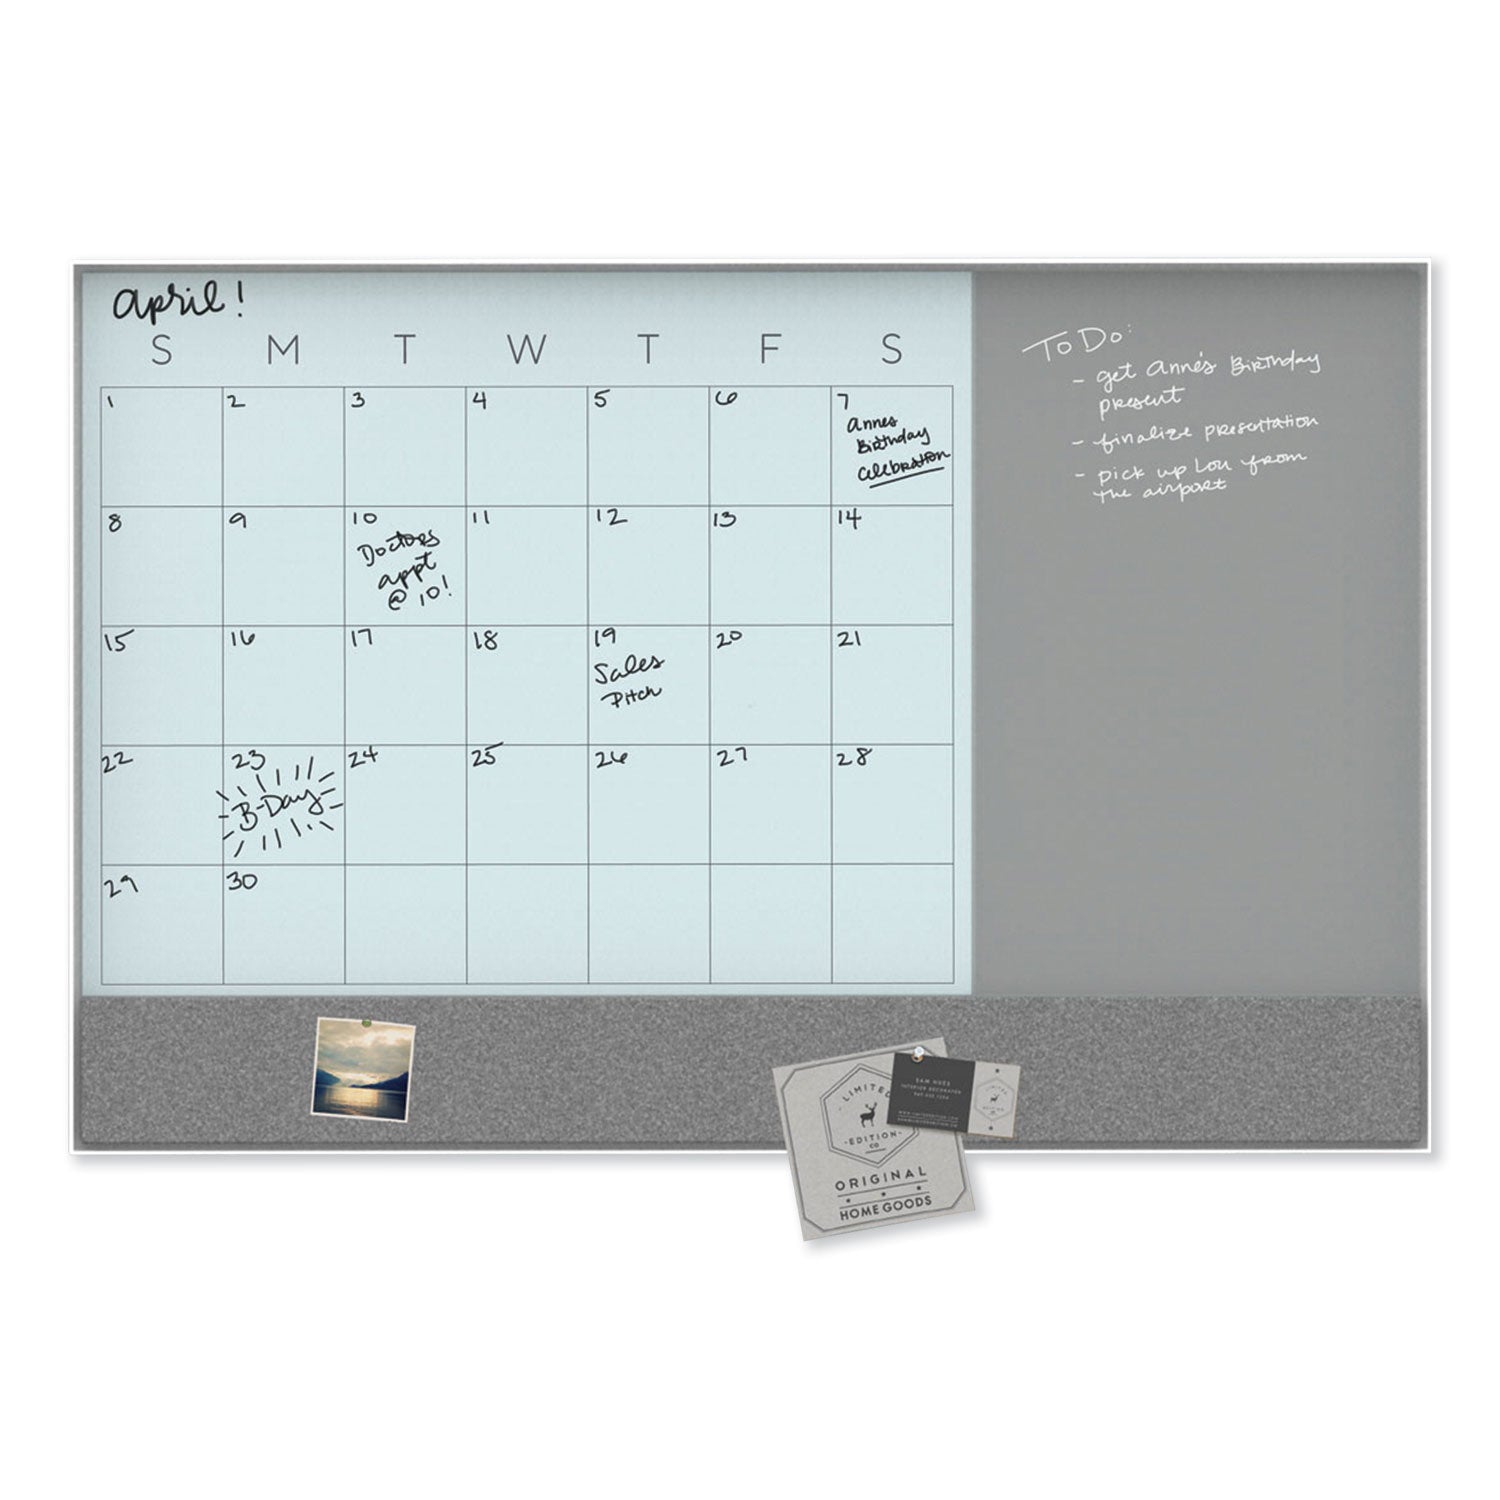 3n1-magnetic-glass-dry-erase-combo-board-23-x-17-month-view-gray-white-surface-white-aluminum-frame_ubr3196u0001 - 3